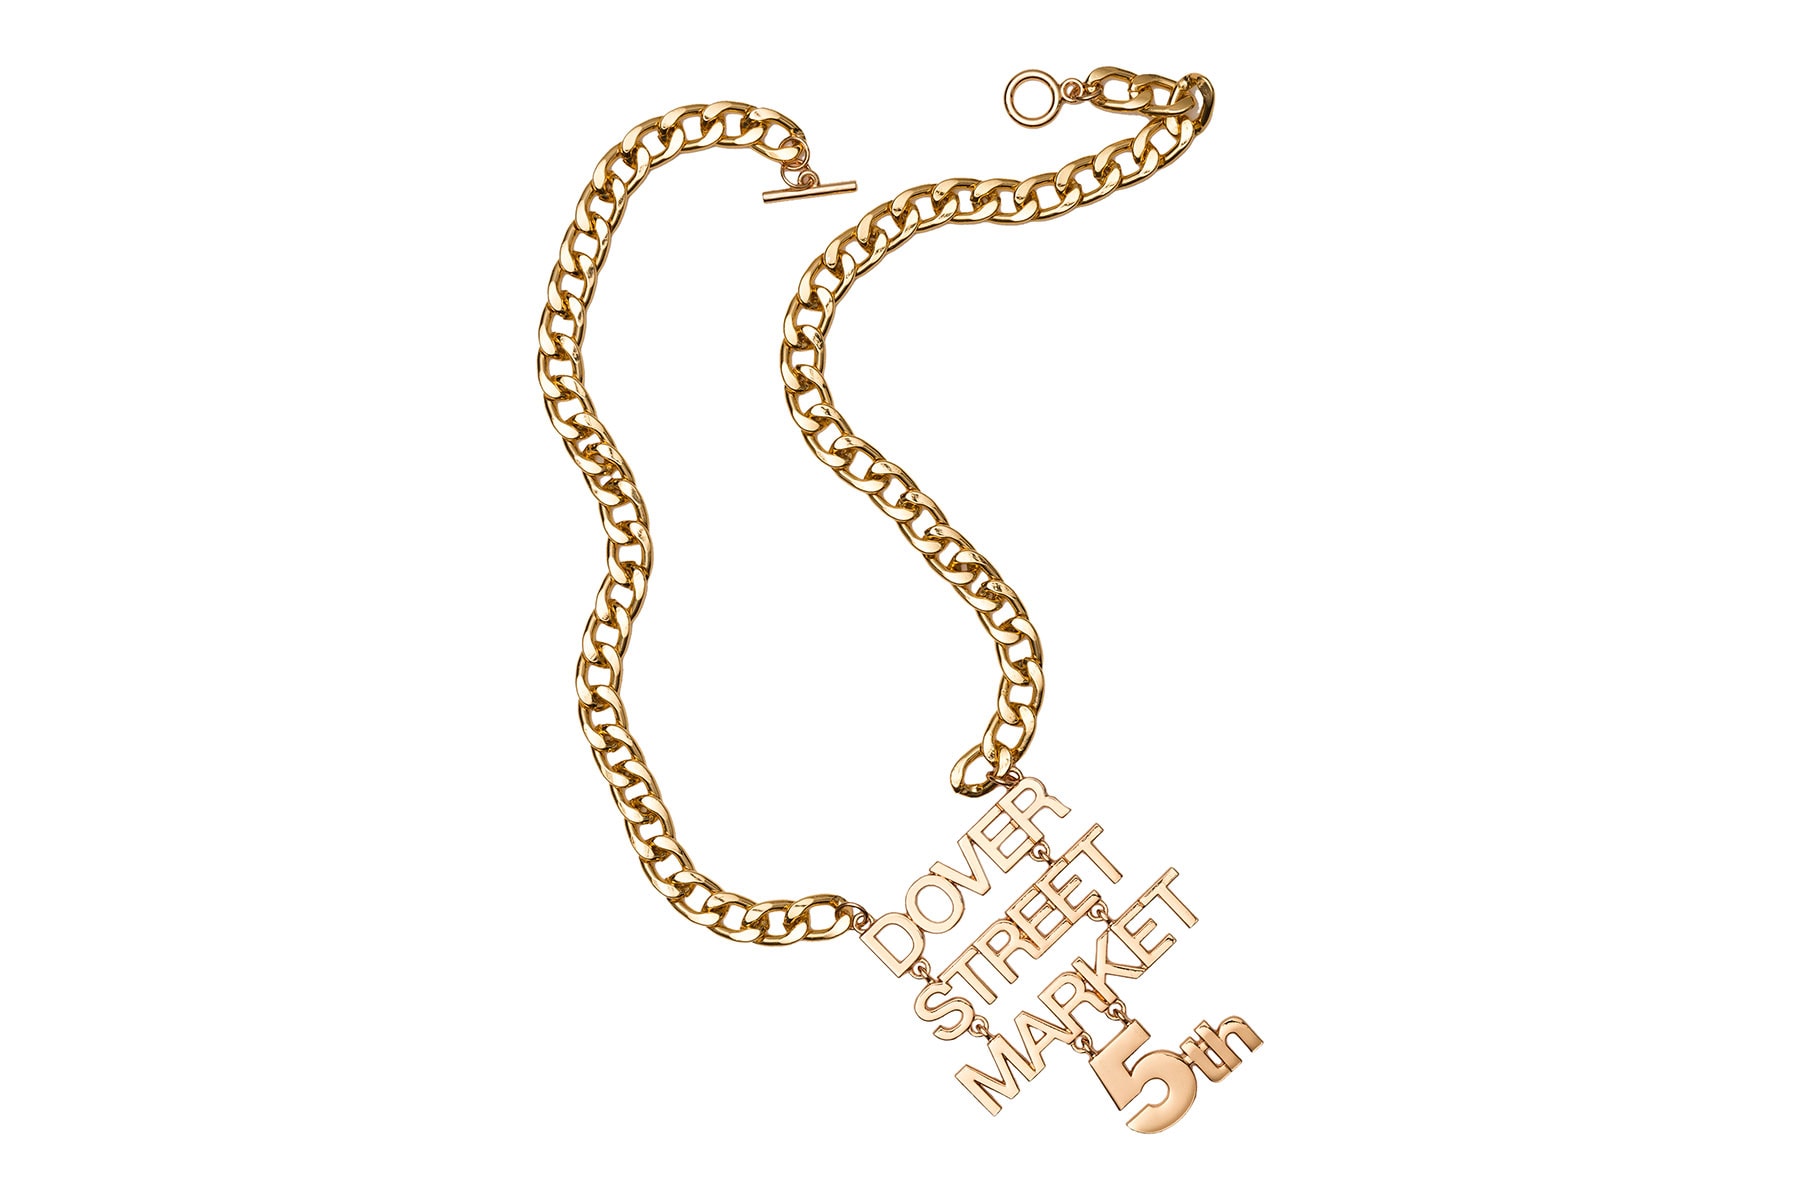 Dover Street Market Ginza 5th Anniversary Free Necklace